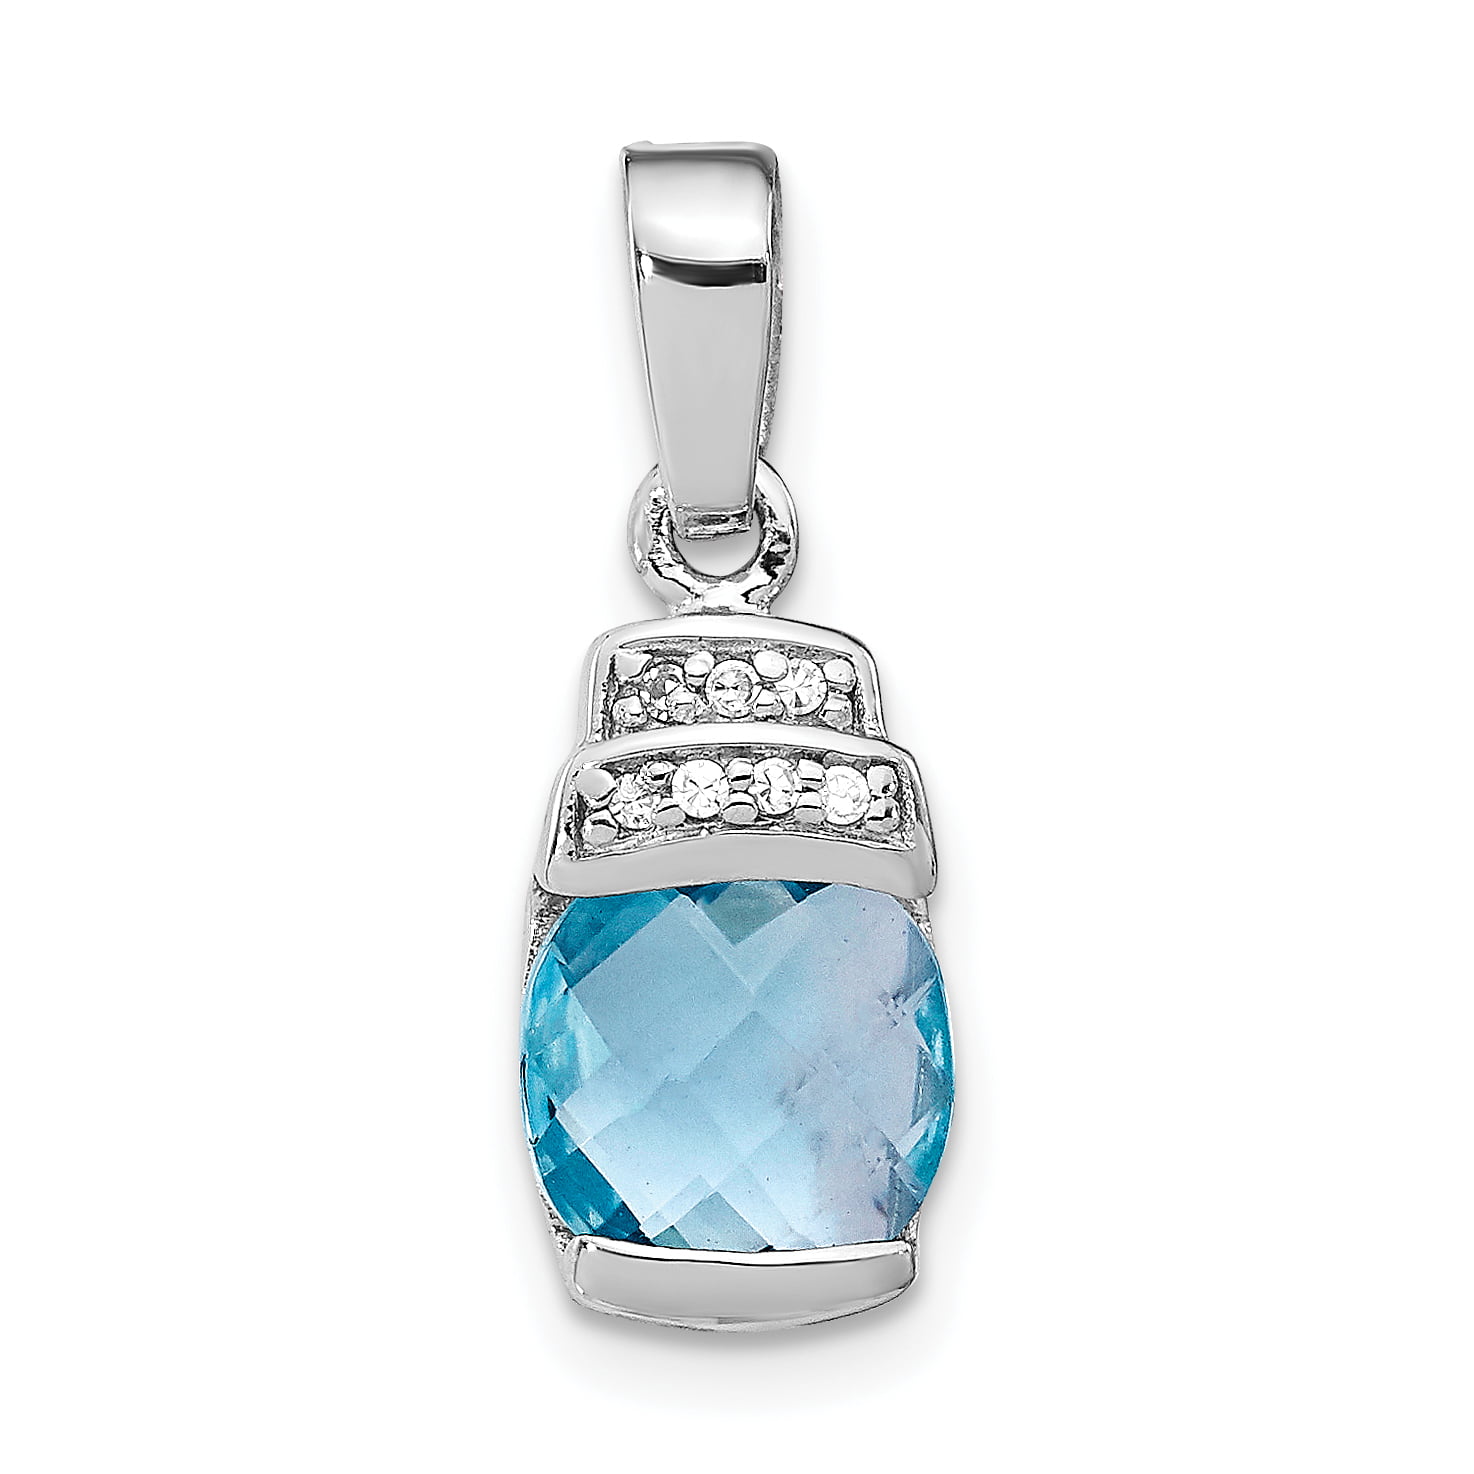 Perfect Jewelry Gift Sterling Silver Rhodium-Plated CZ & Synthetic Blue Stone Pendant 